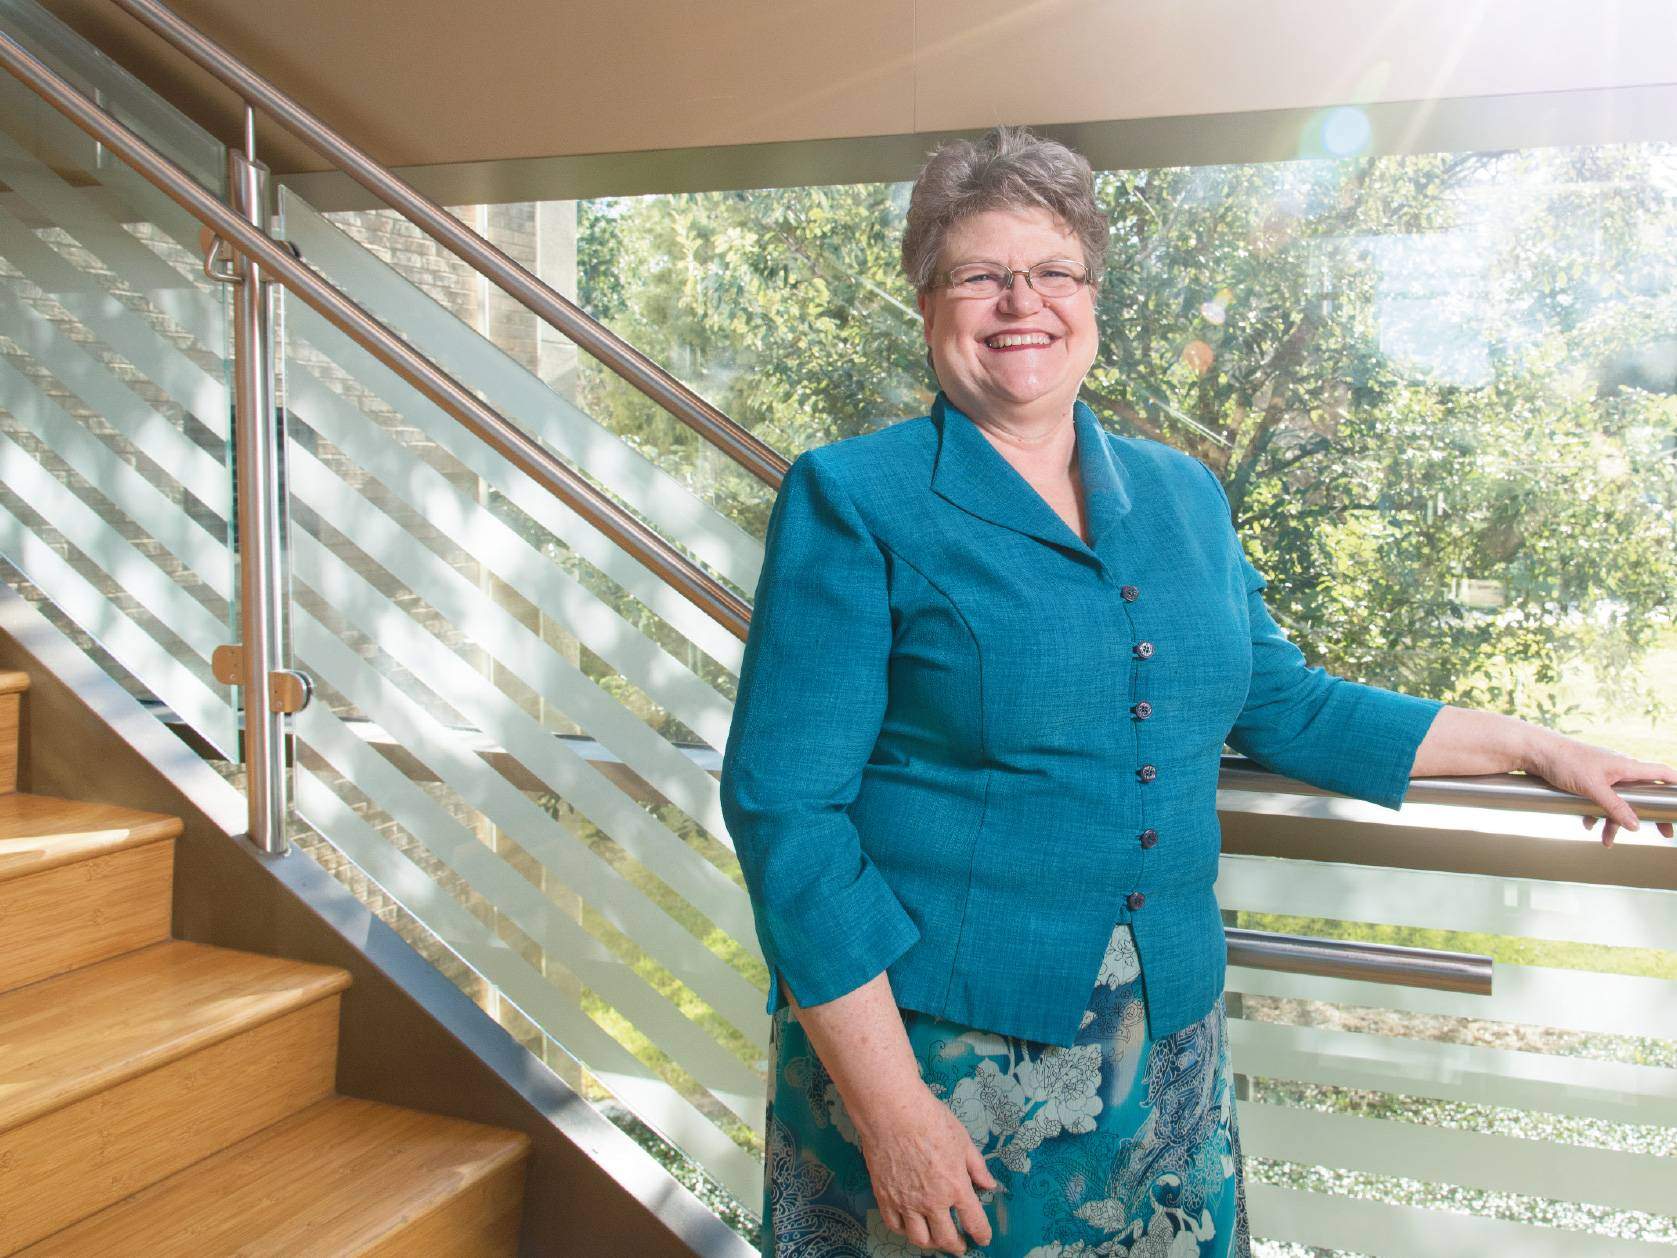 Dr. Sandra Duke stands in a sunny staircase, smiling